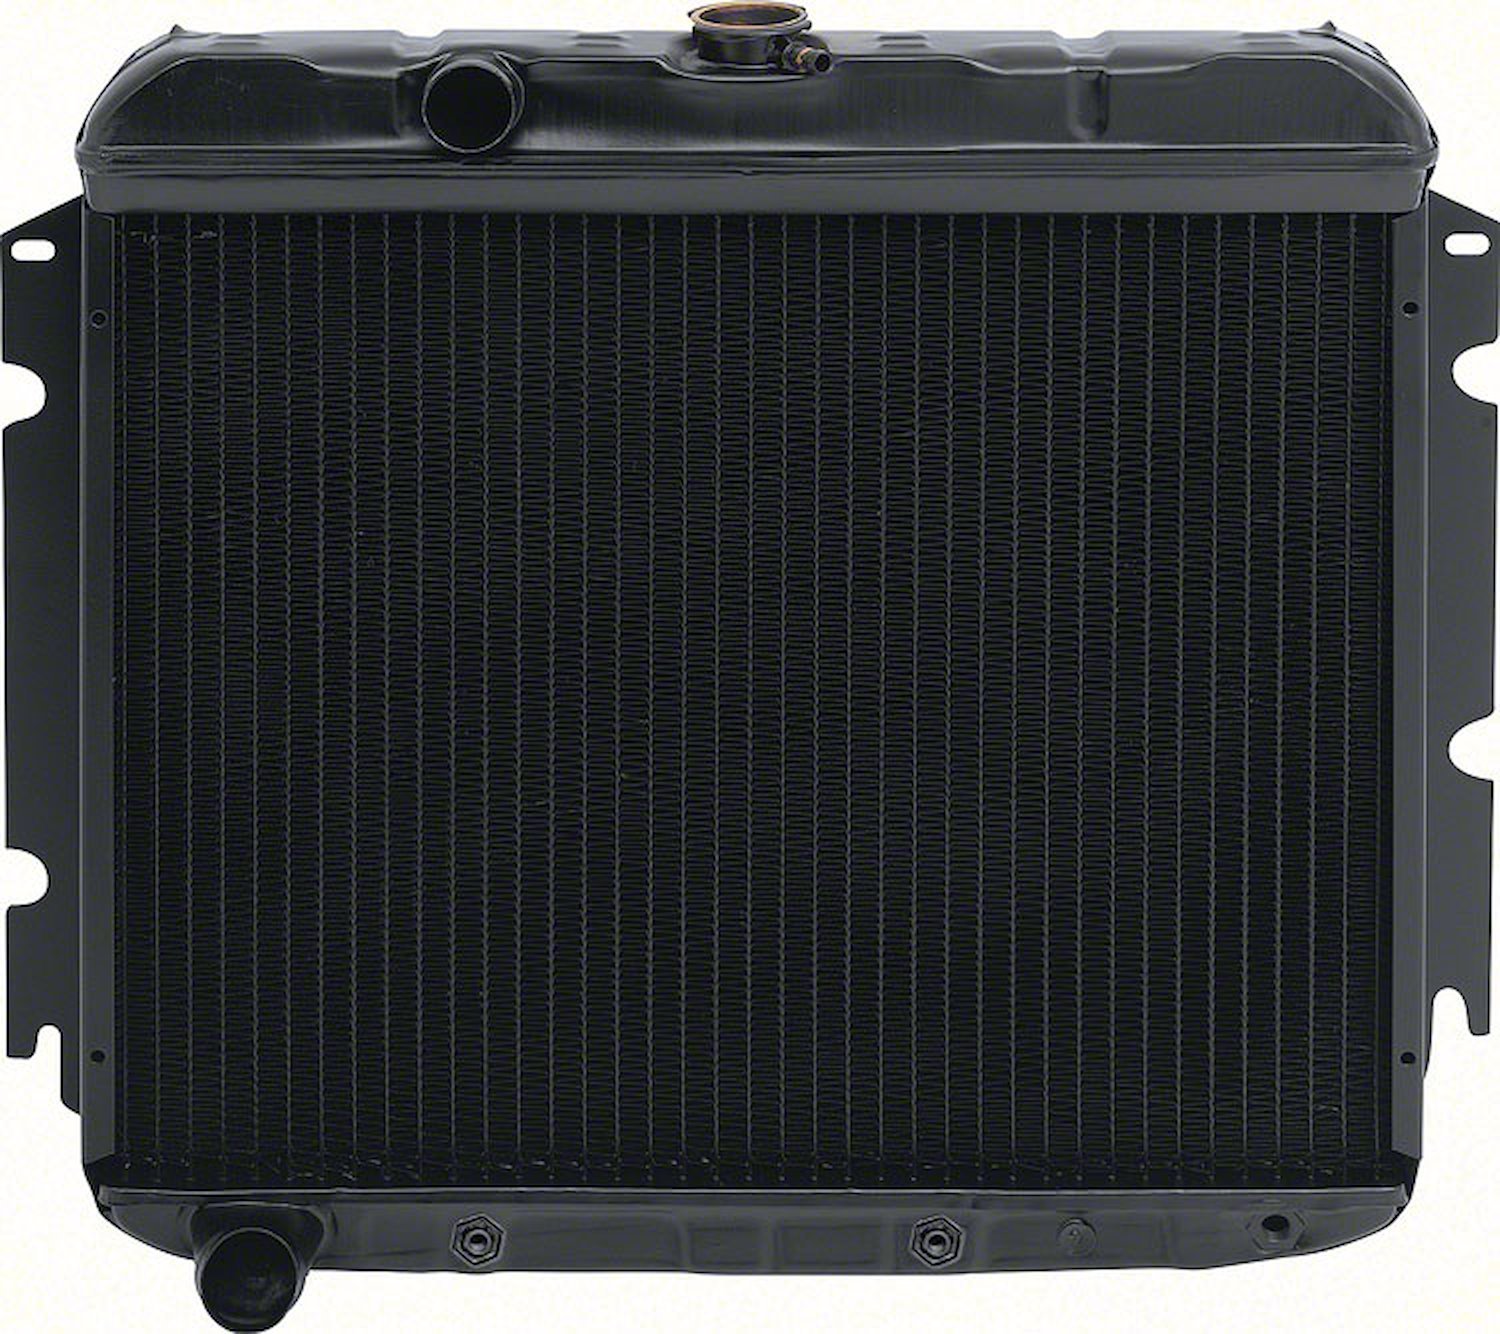 MA2247A Replacement Radiator 1967-69 Mopar A-Body A-Body Big Block V8 With Automatic Trans 3 Row